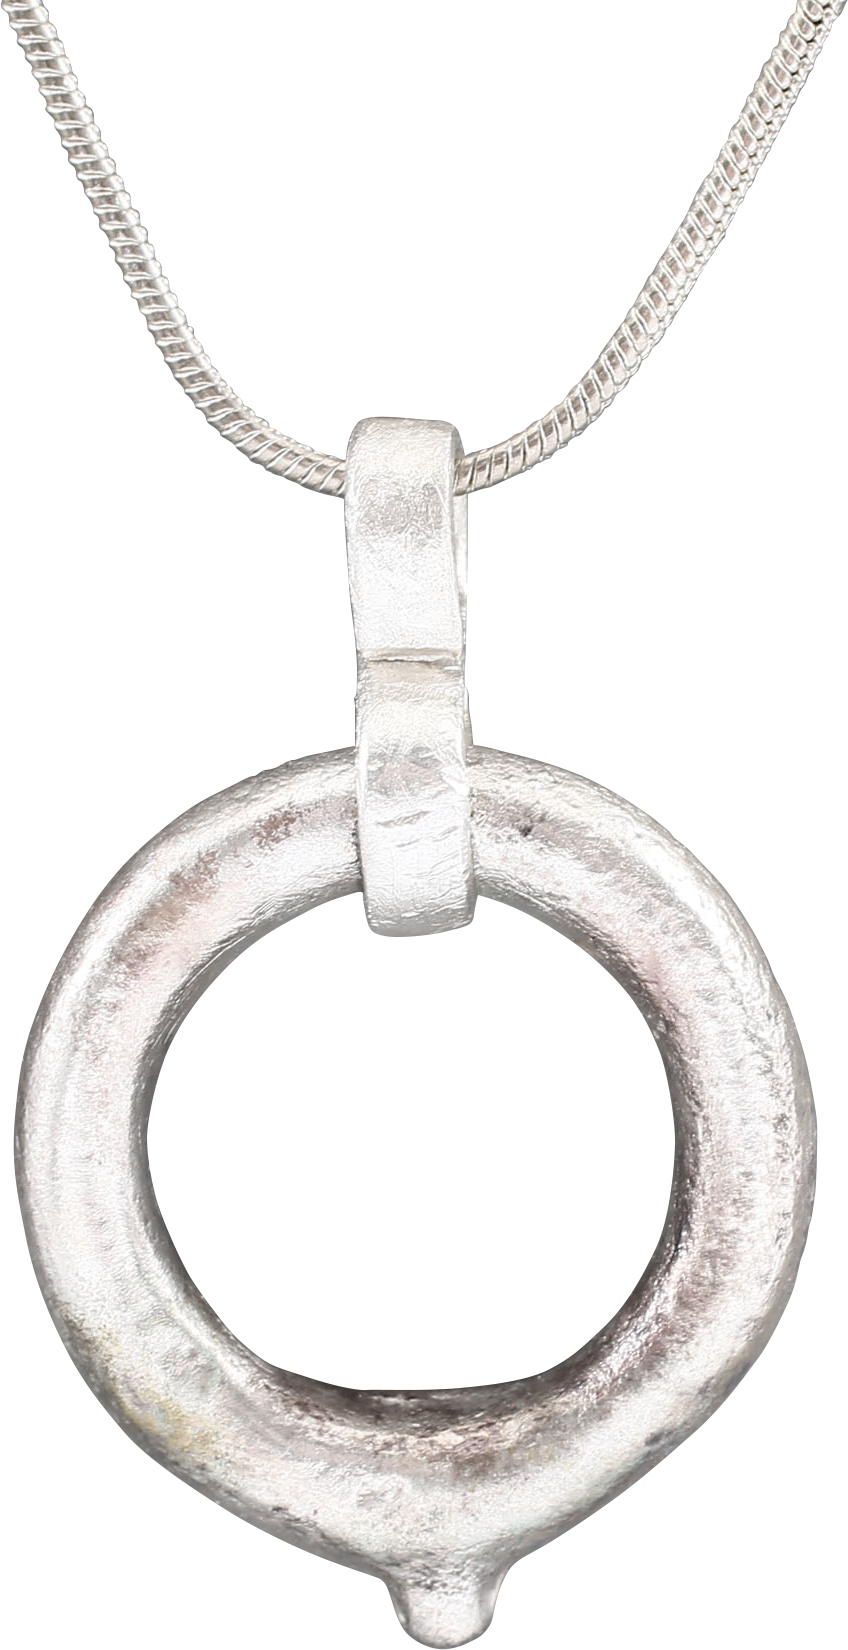 CELTIC PROSPERITY RING NECKLACE, C.300-100 BC - Fagan Arms